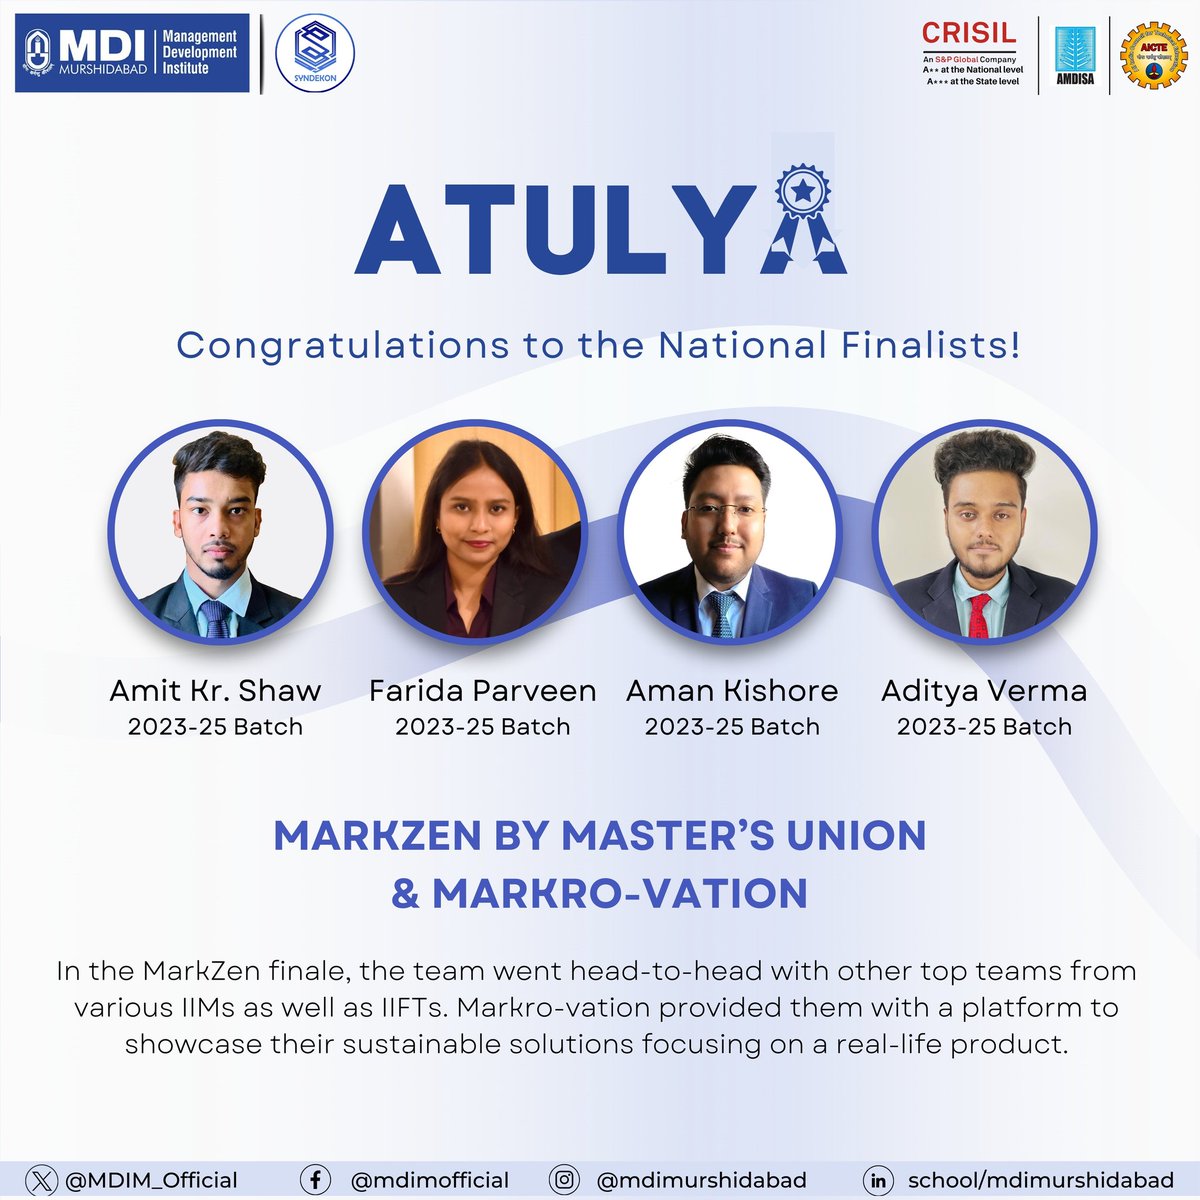 Presenting the Atulya series which aims to highlight the achievements garnered by the students across various #Bschools.With immense pride, #MDIM announces that these students have secured 4th position in MarkZen: The Marketing Case #Competition, hosted by the Master's Union.#MBA